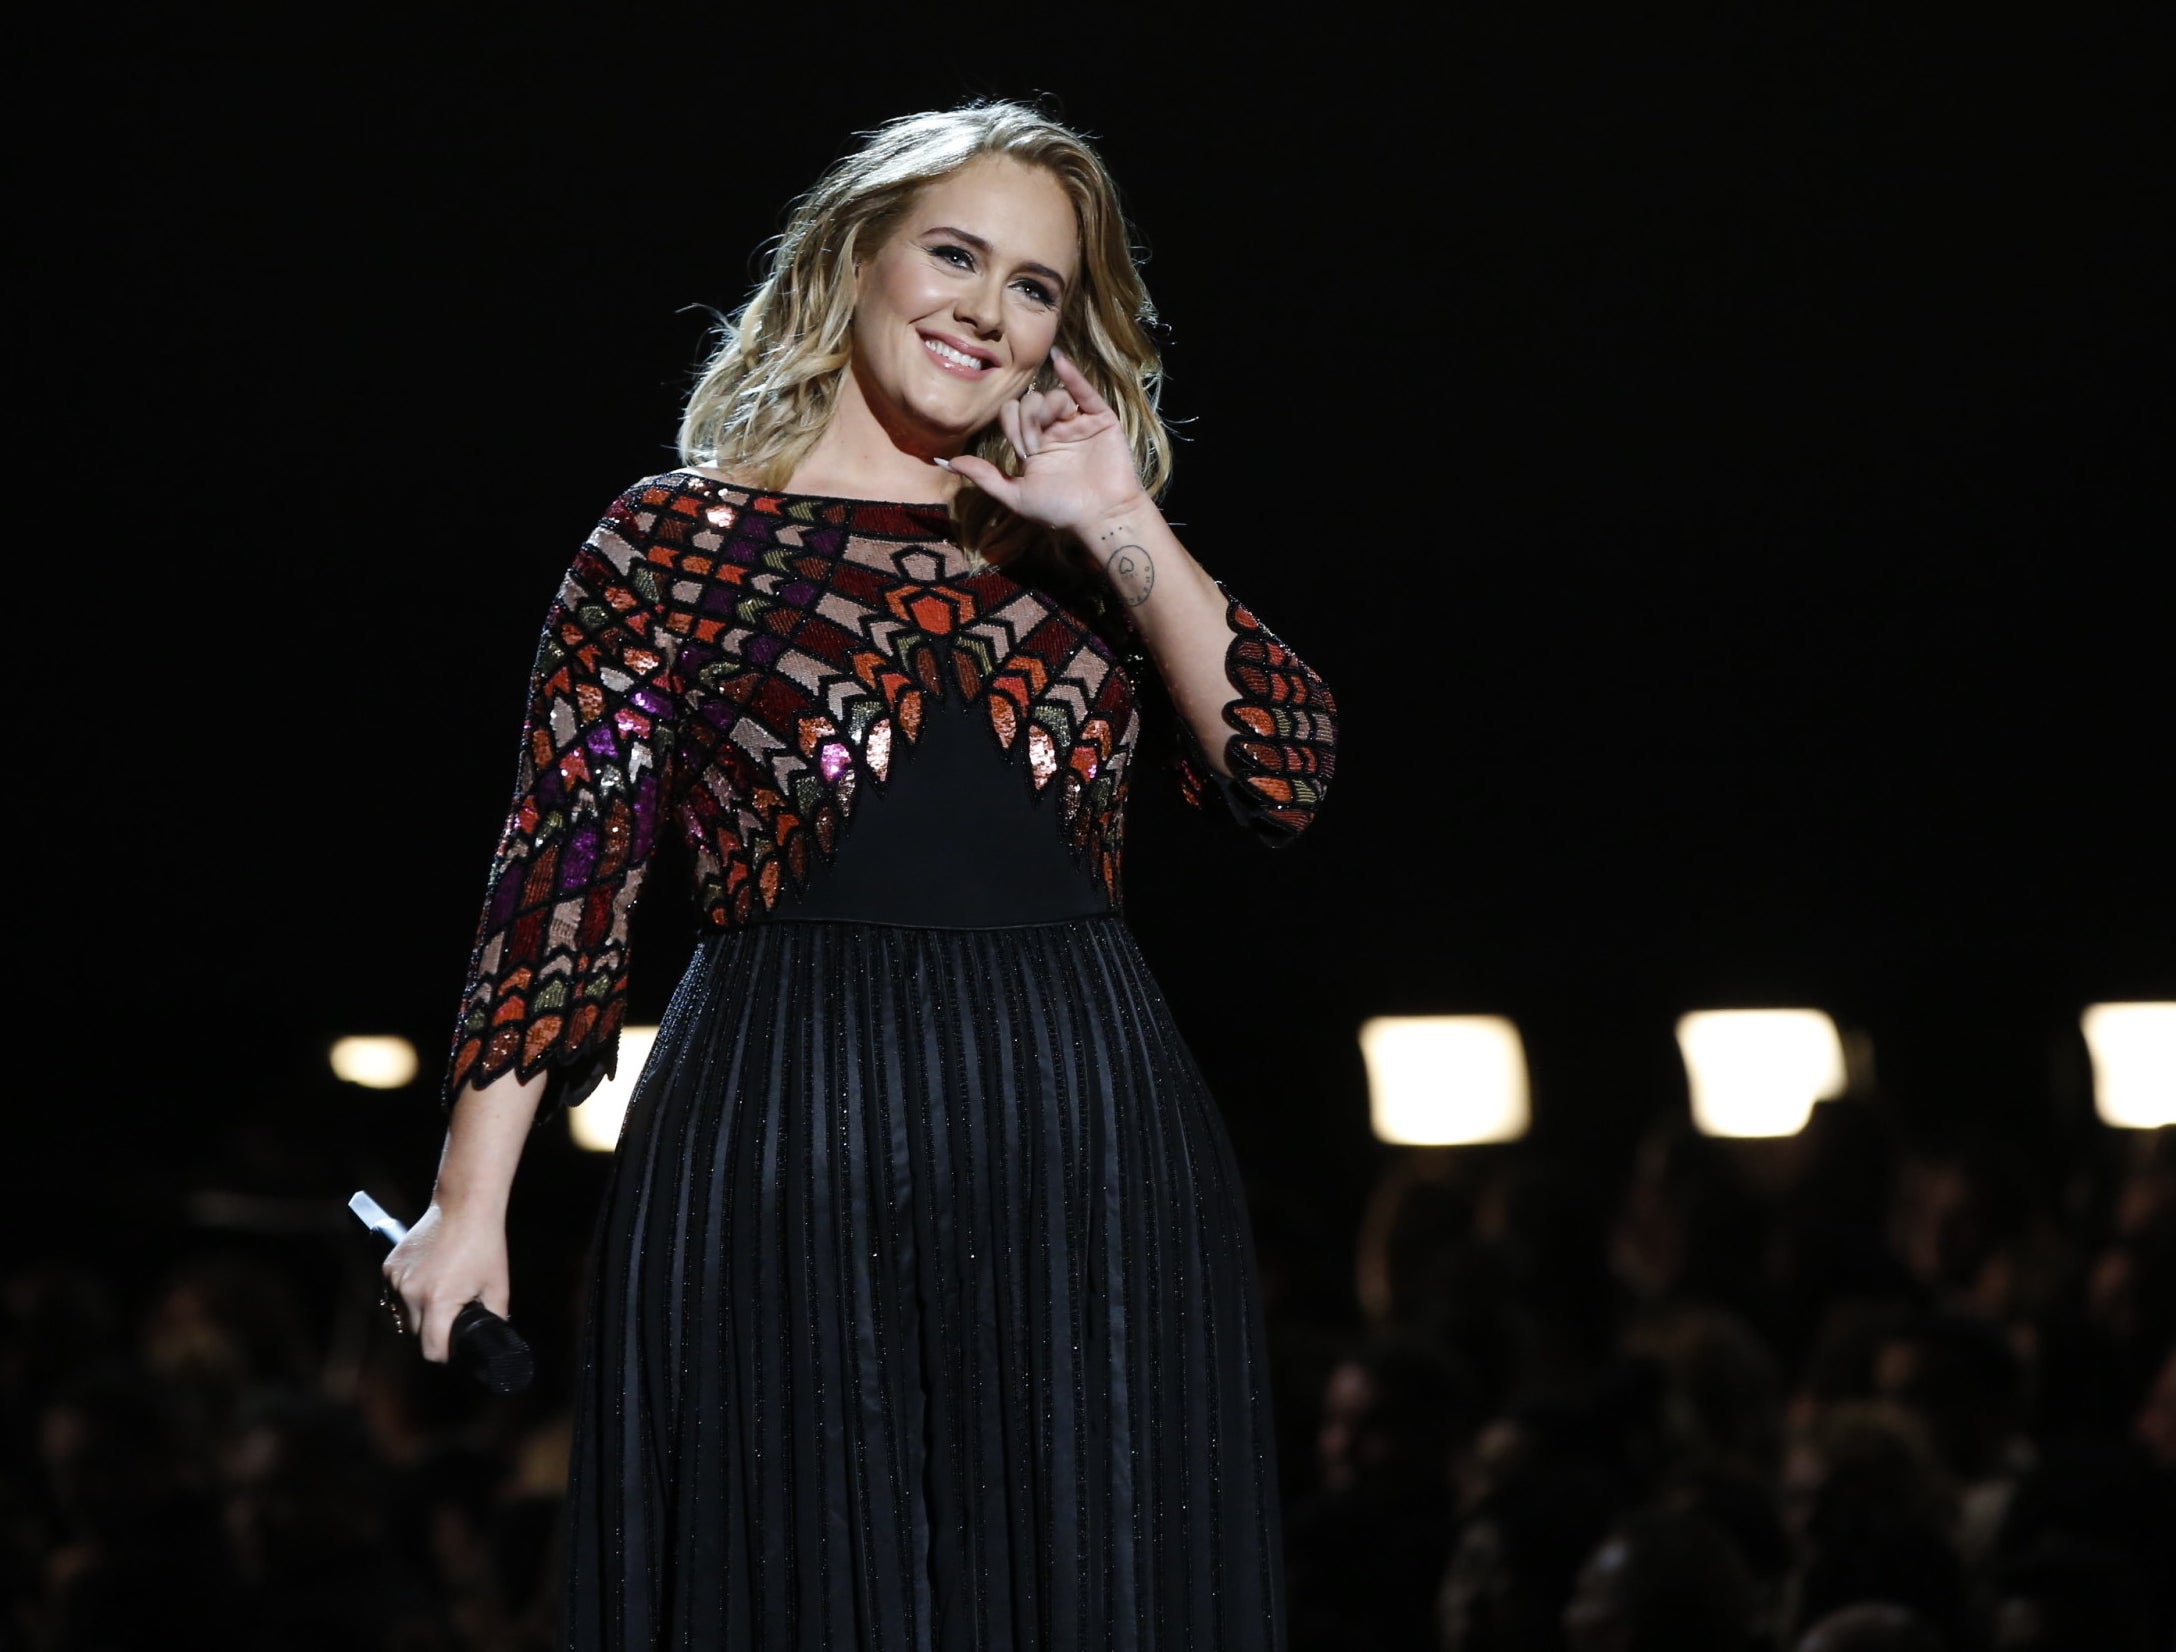 Adele smiles during a concert